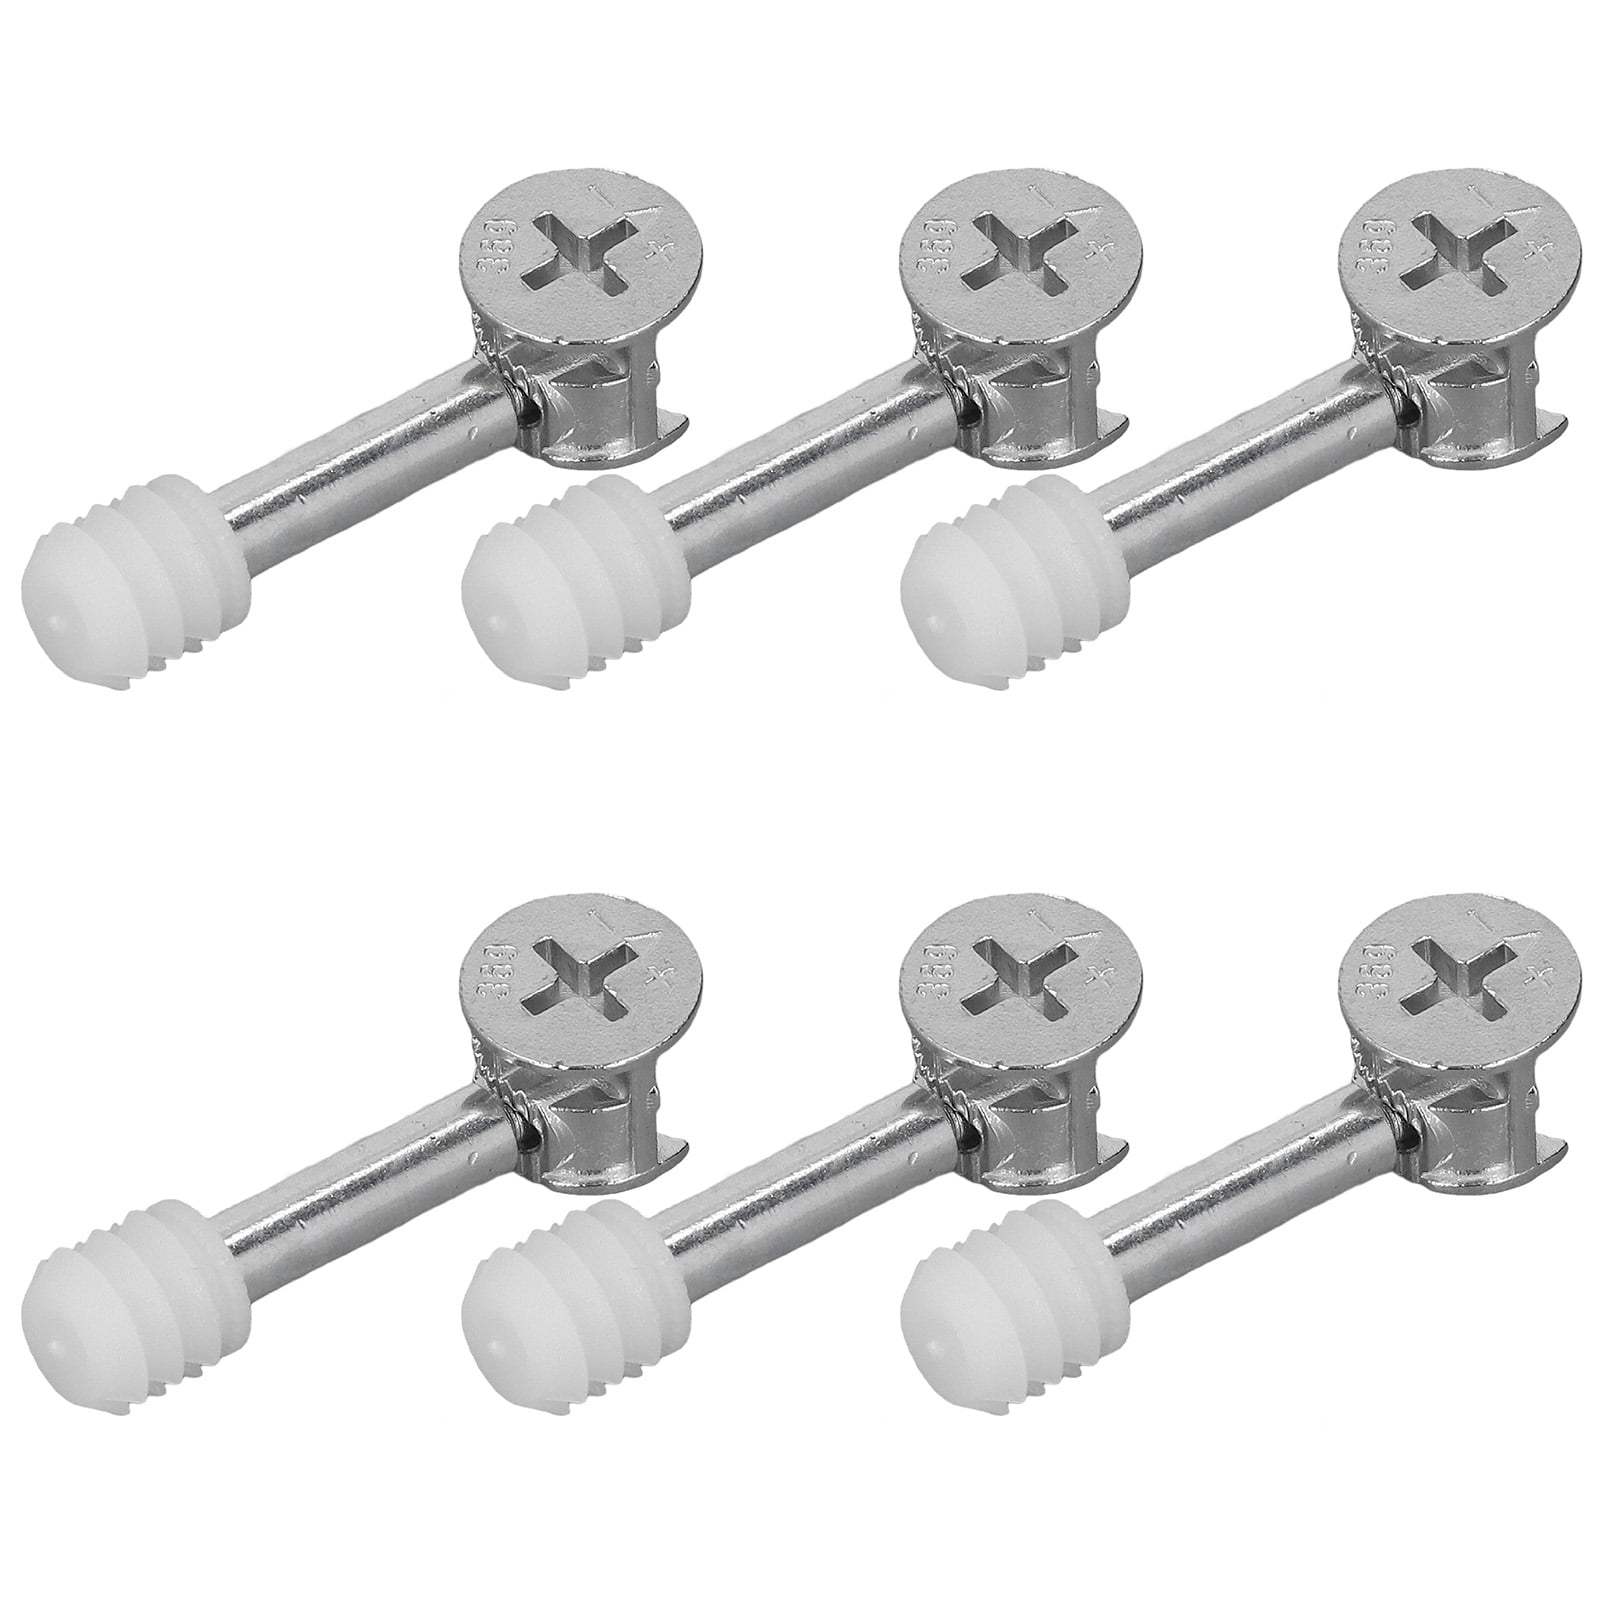 Cionyce 20 Pcs Furniture Connecting Cam Fittings 15mm x 12mm Furniture Connecting Fastener Lock Nut for Cabinet Cupboard Drawer 